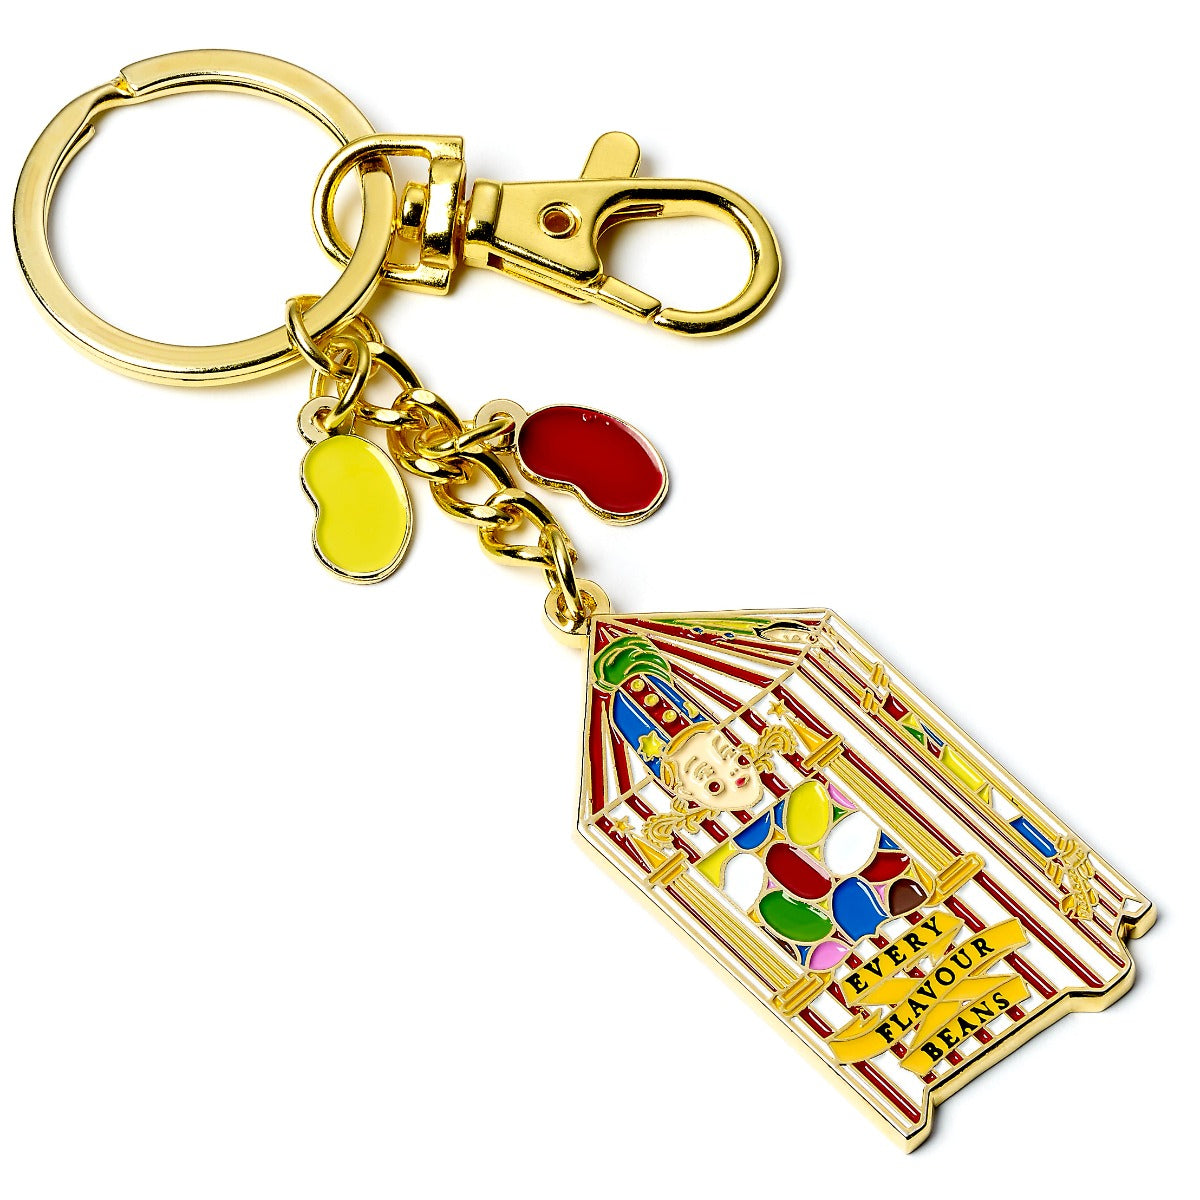 Bertie Botts Every Flavour Beans (Harry Potter) Keychain